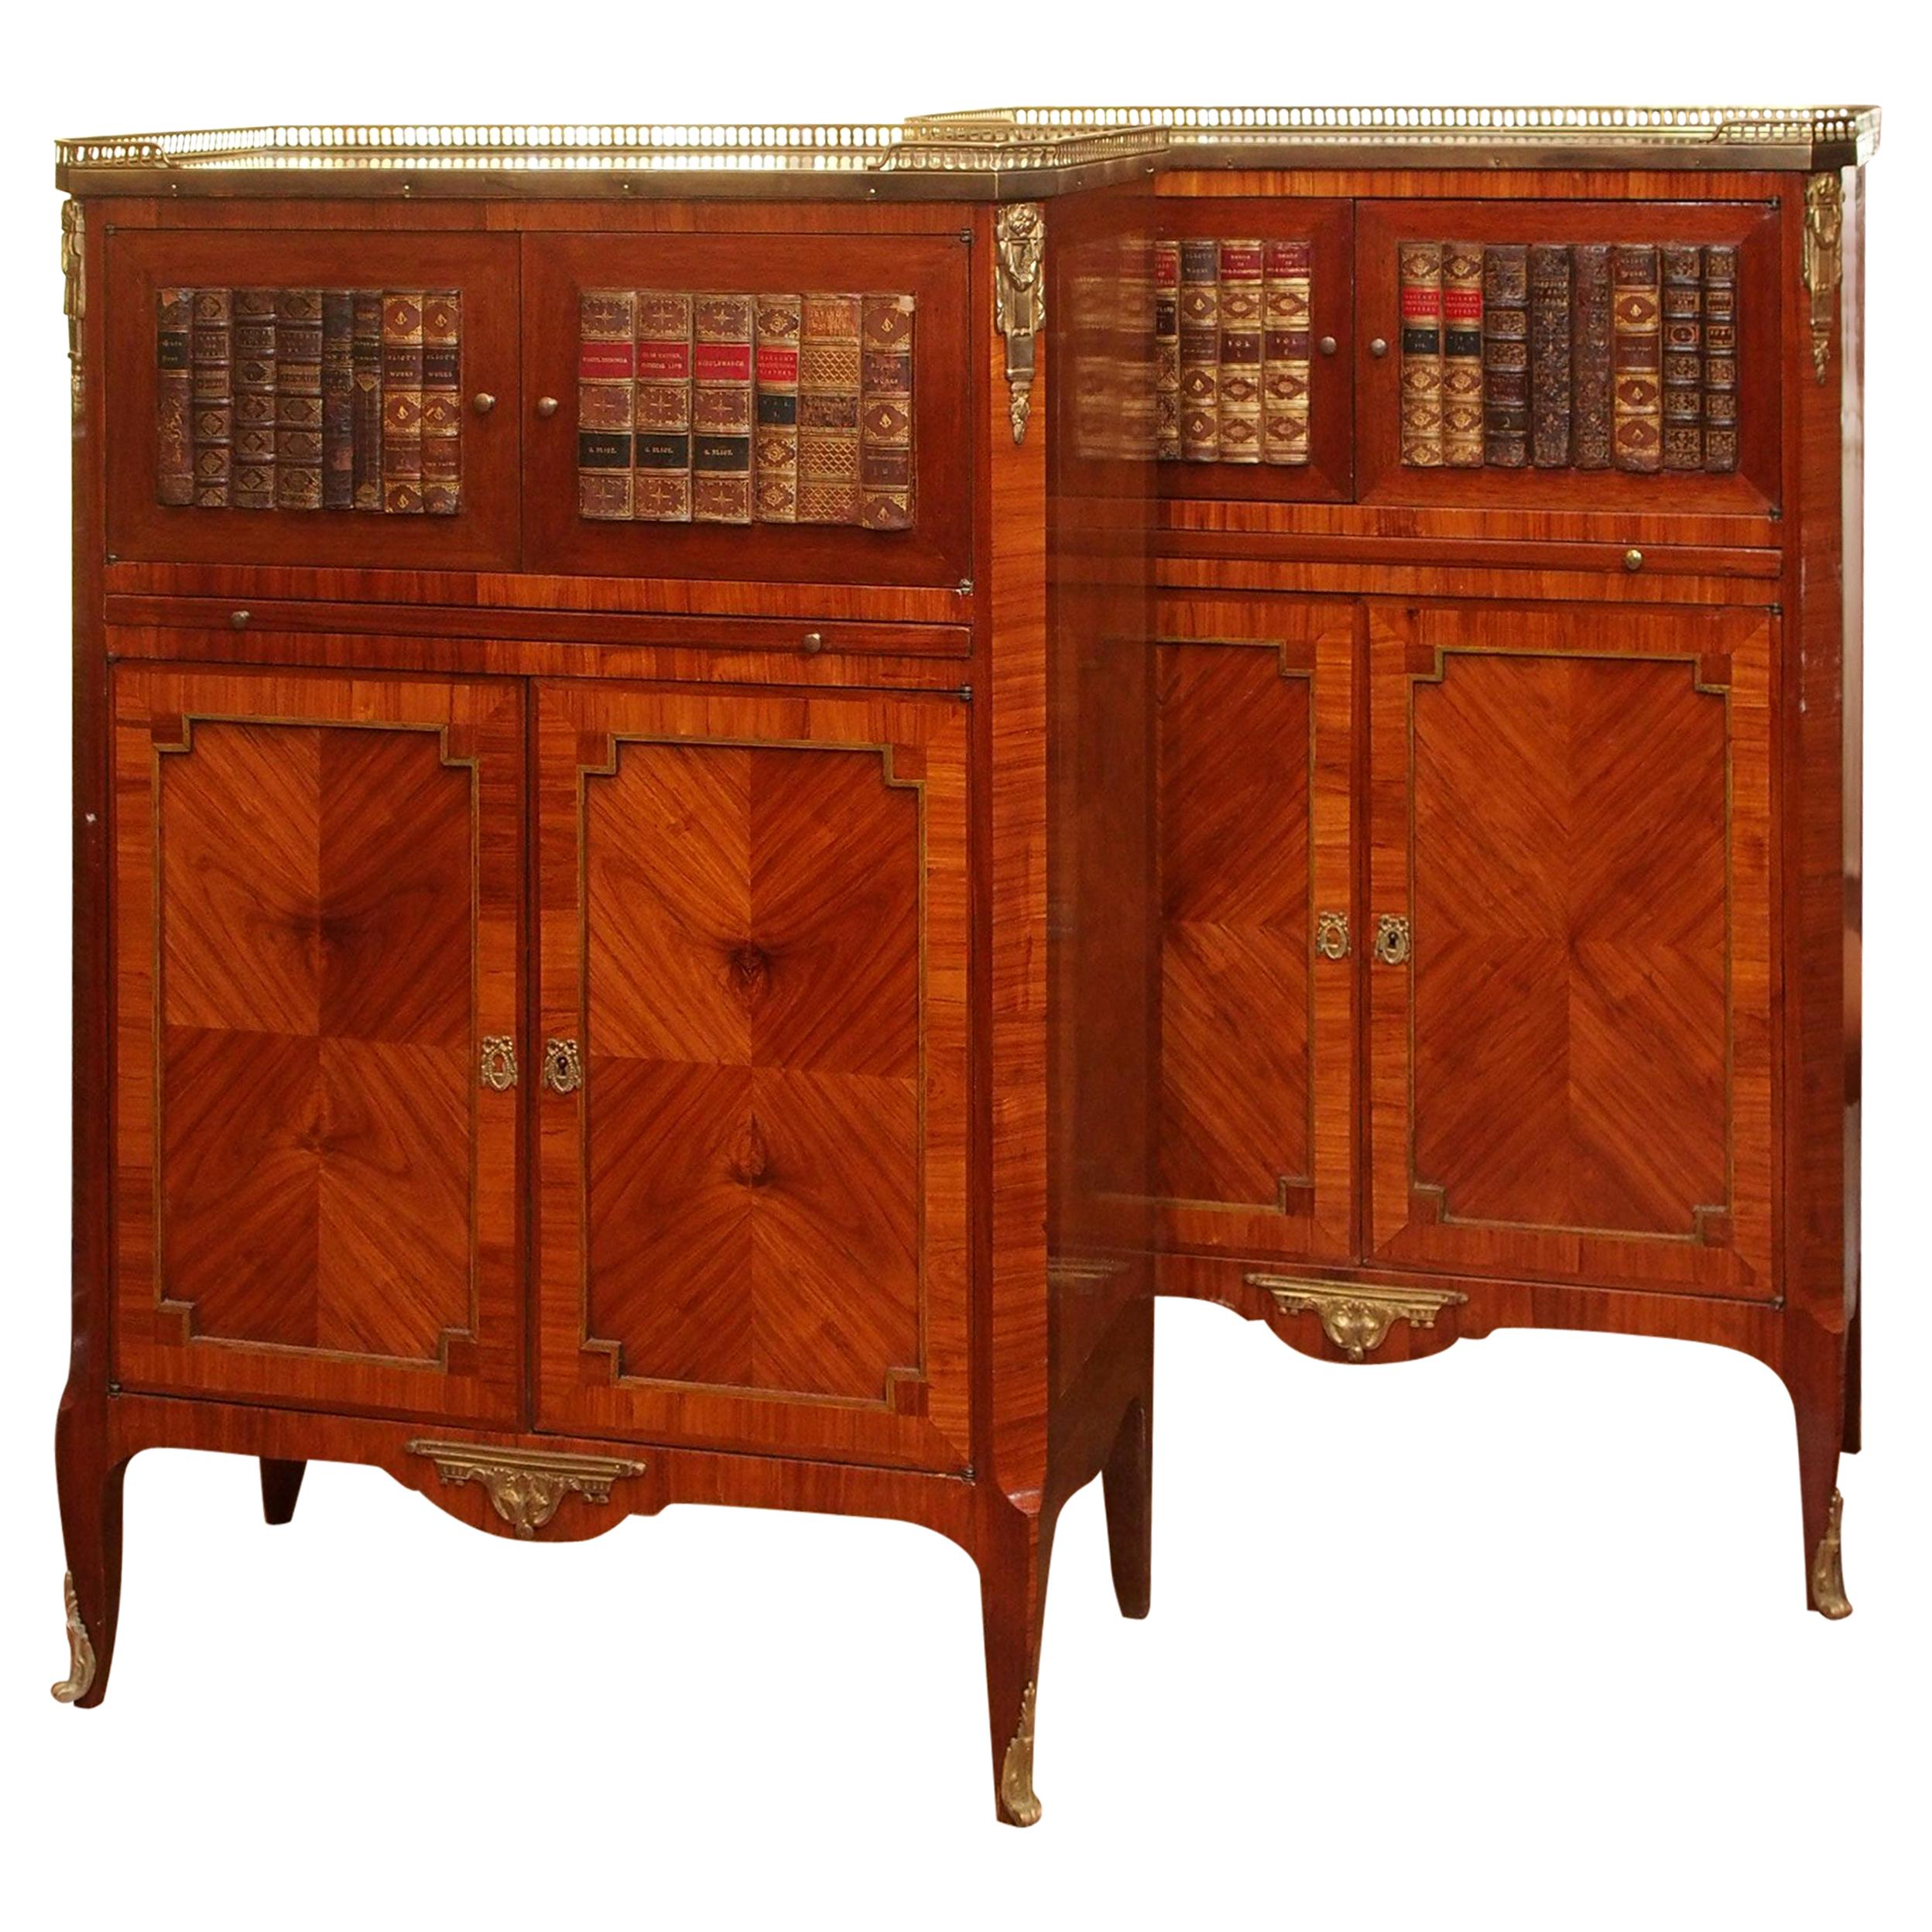 Pair of Antique English Mahogany Marble-Top Library Bookcases, circa 1880